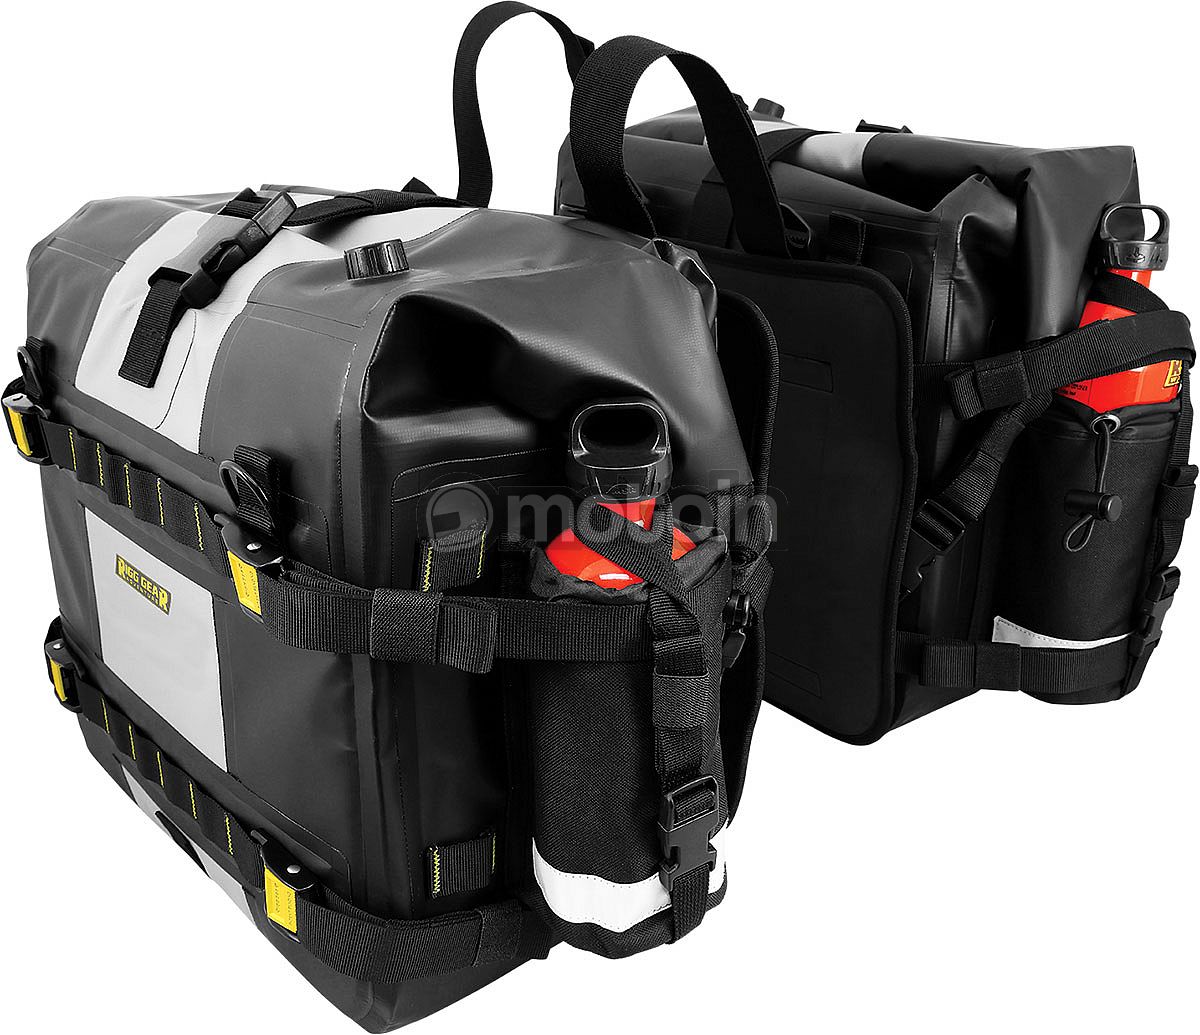 Nelson Rigg Hurricane 2x25L, alforjas impermeables